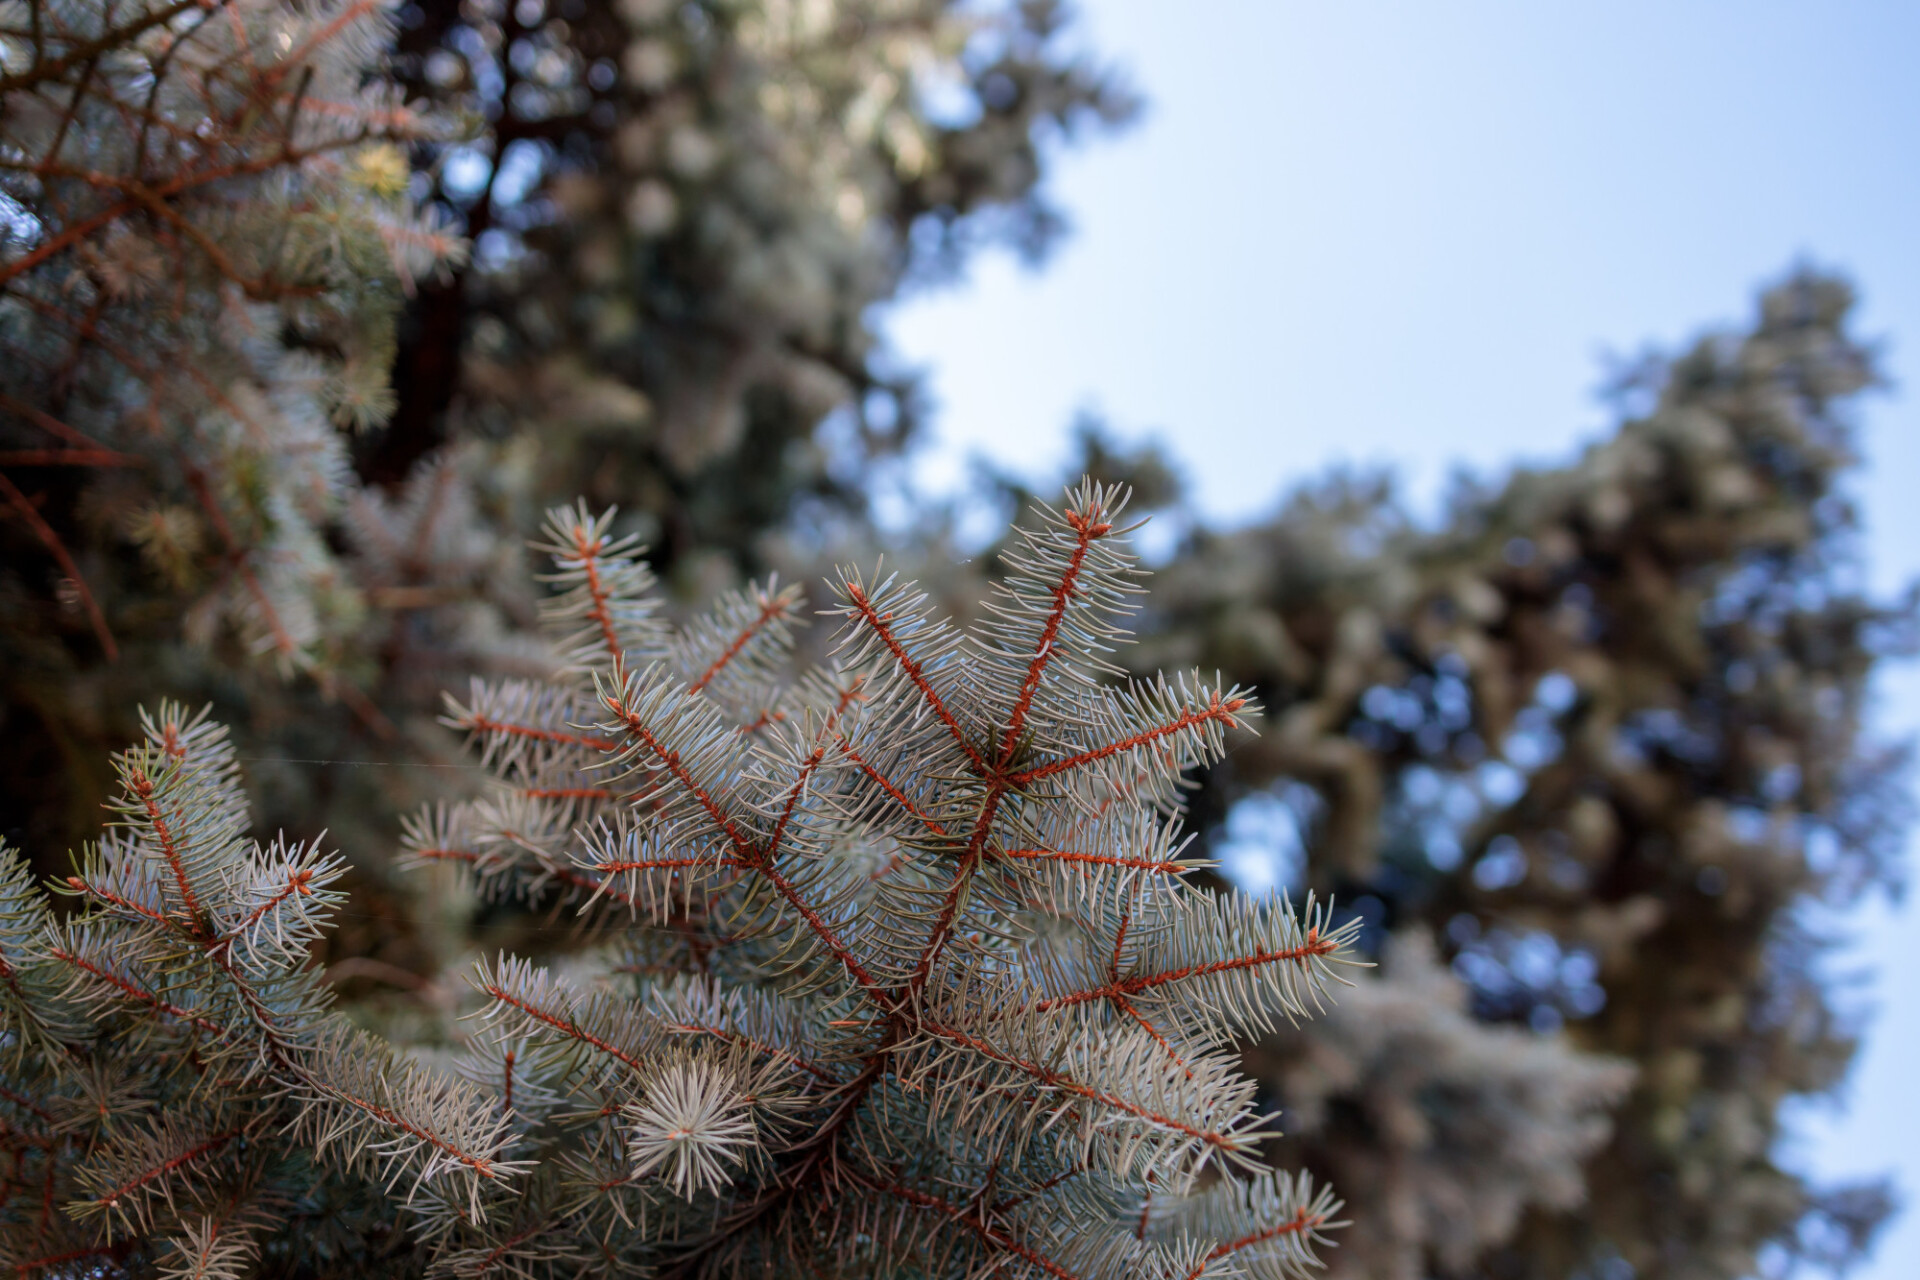 View up to a blue spruce